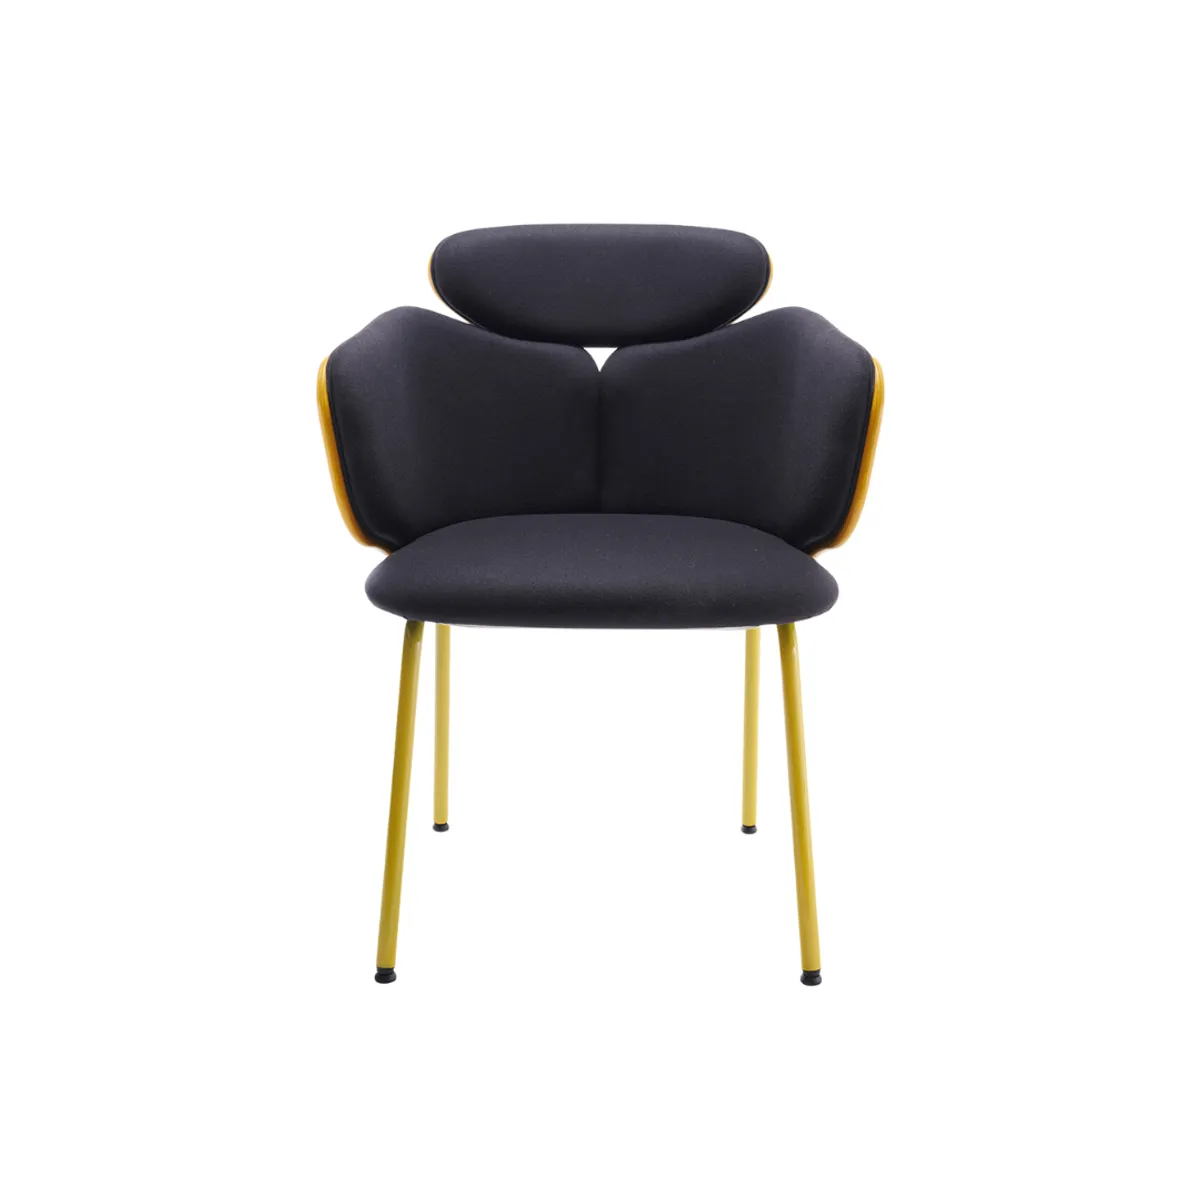 Russo armchair 1